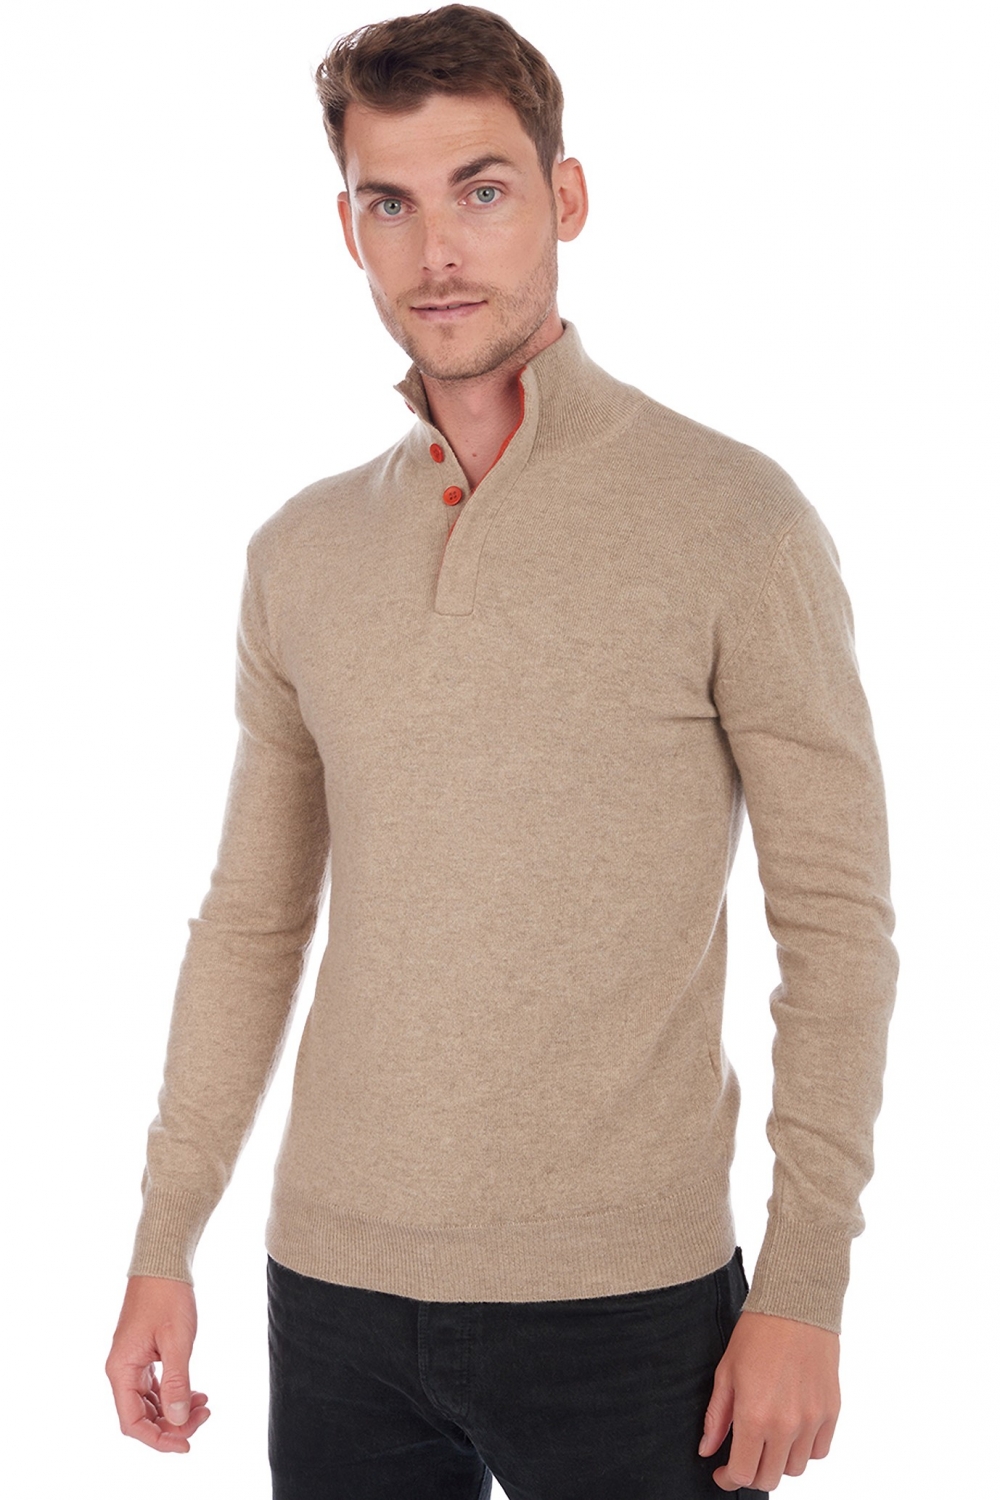 Cashmere men polo style sweaters gauvain natural brown paprika 2xl